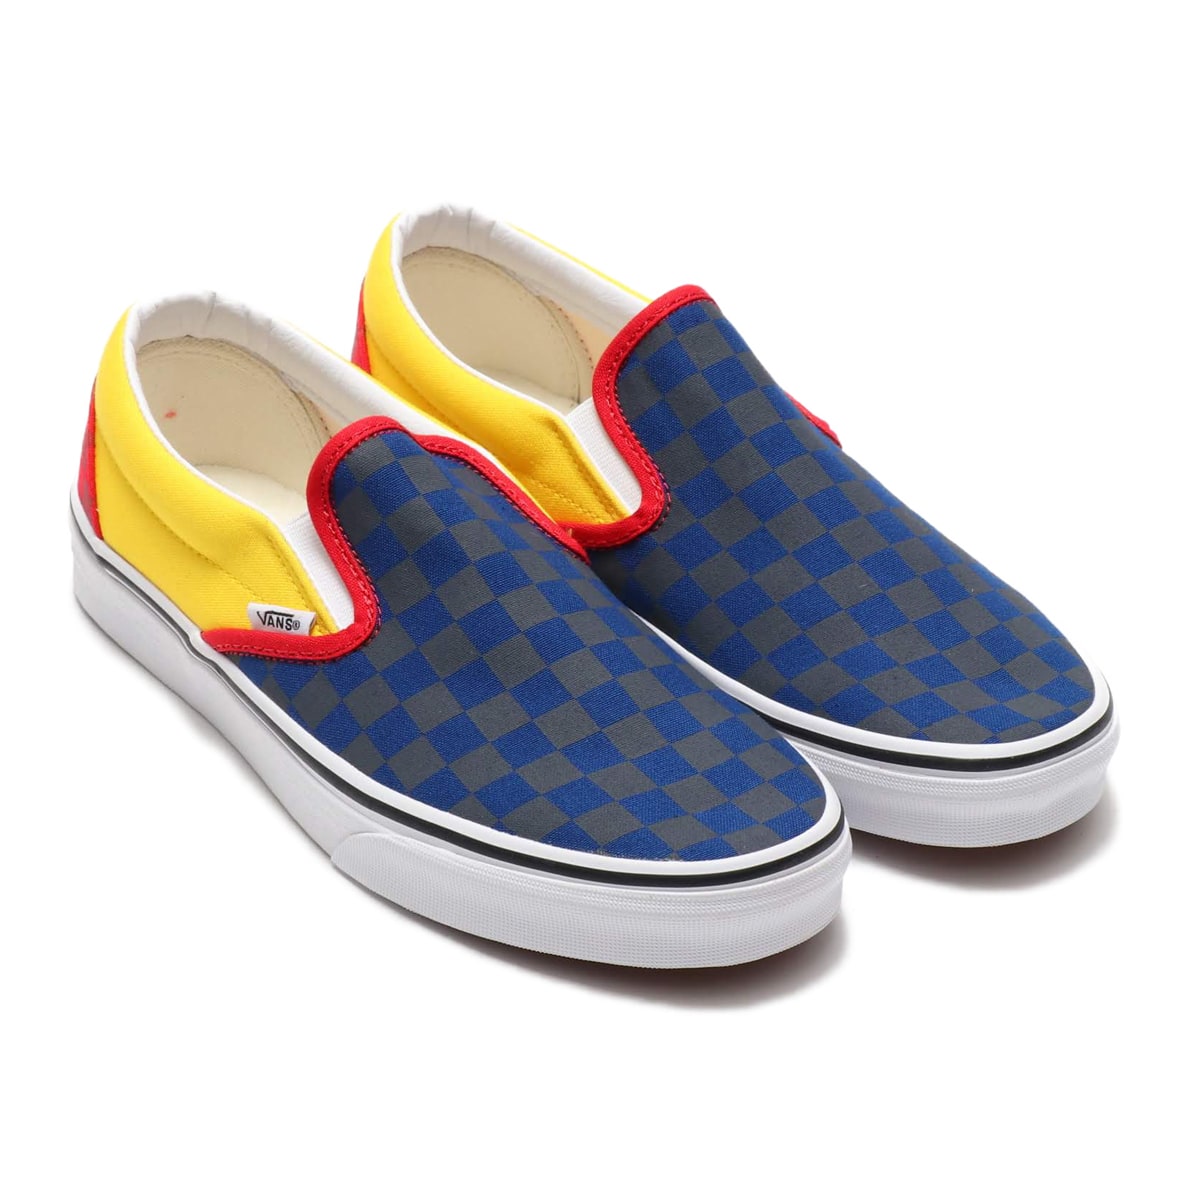 afbryde krater snorkel VANS CLASSIC SLIP-ON OTW RALLY NAVY/YELLOW/RED 19SU-I